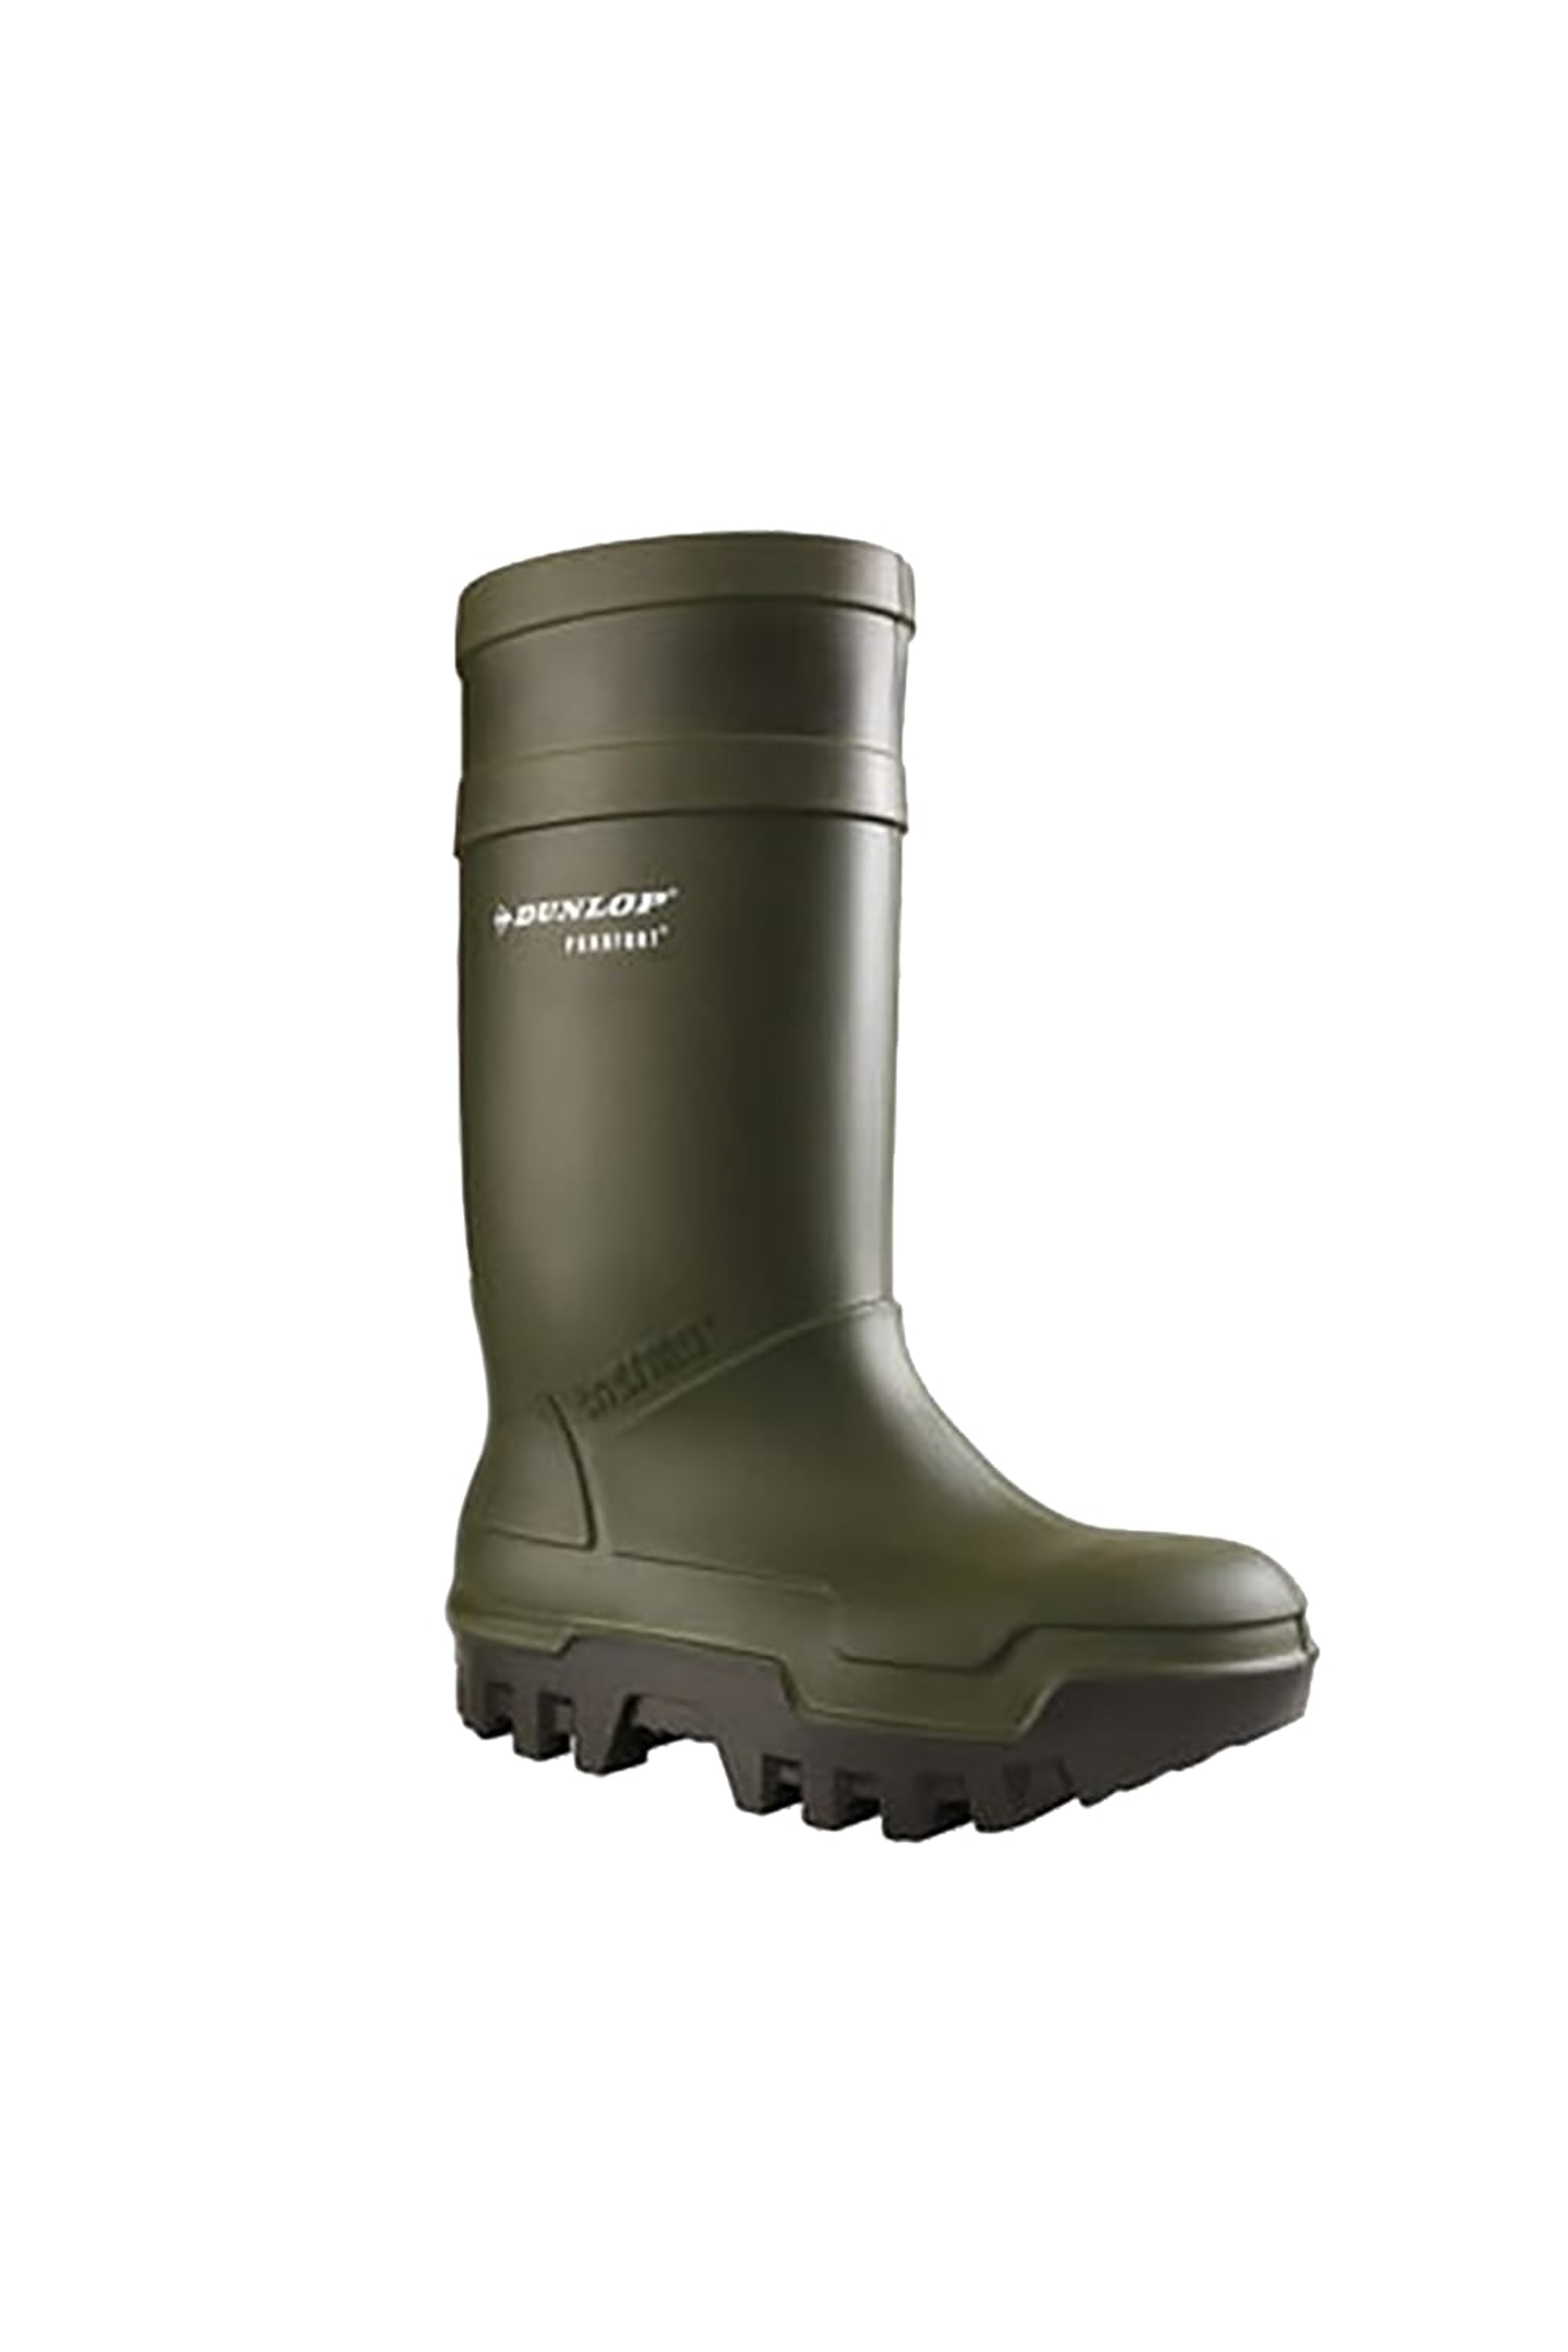 DUNLOP DUNLOP ADULTS UNISEX PUROFORT THERMO PLUS FULL SAFETY WELLIES